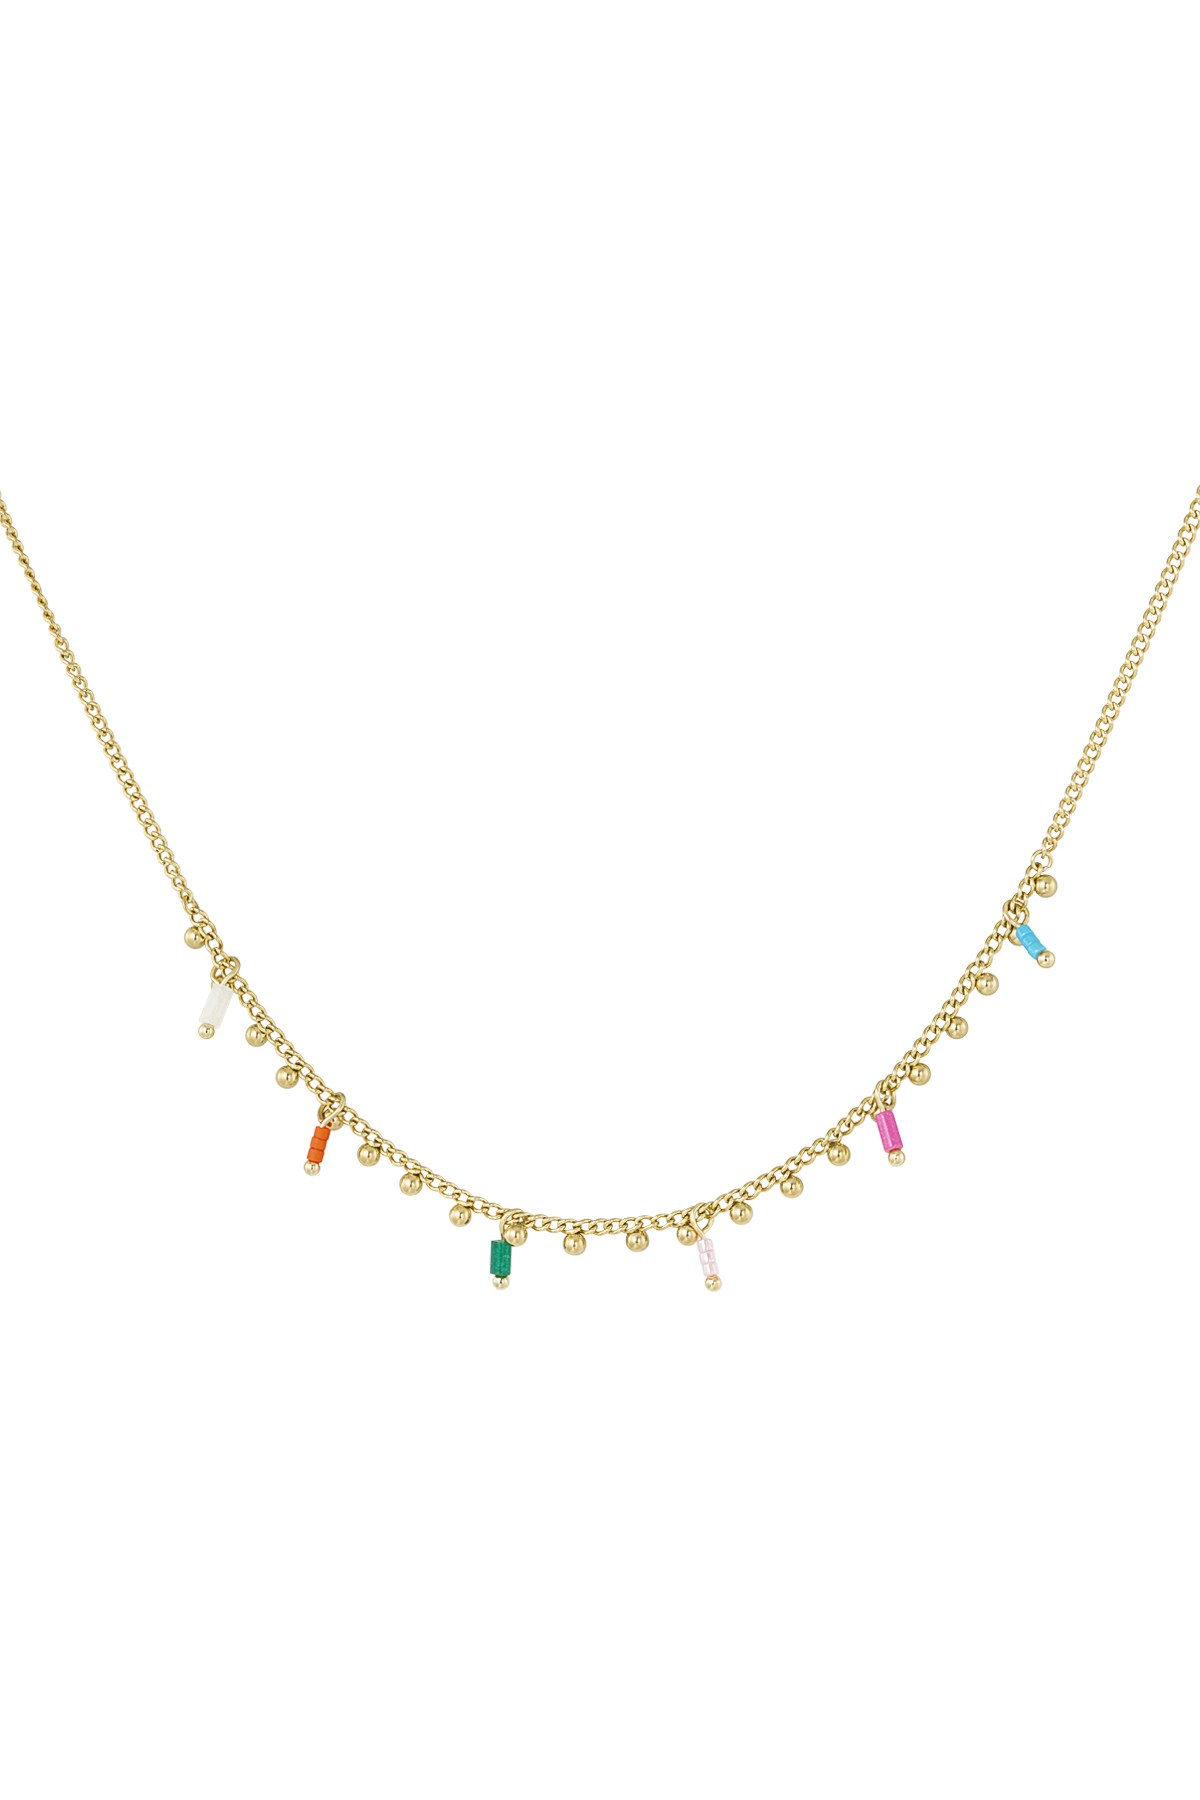 Charm necklace messy colors - gold h5 